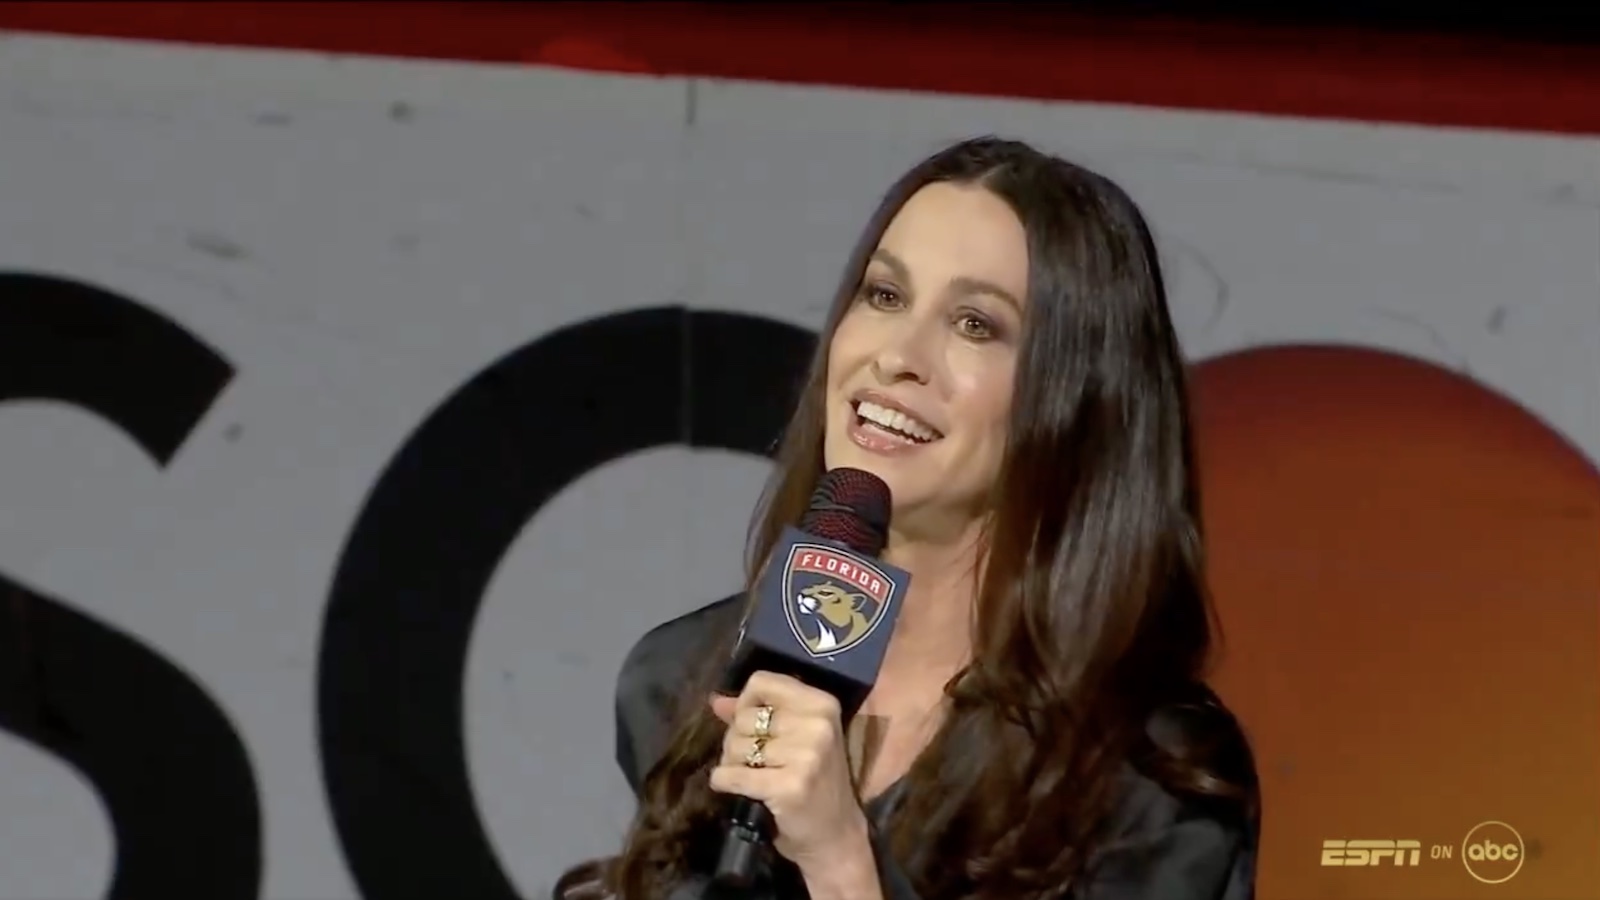 Fans react to Alanis Morissette singing the national anthem before Game 7